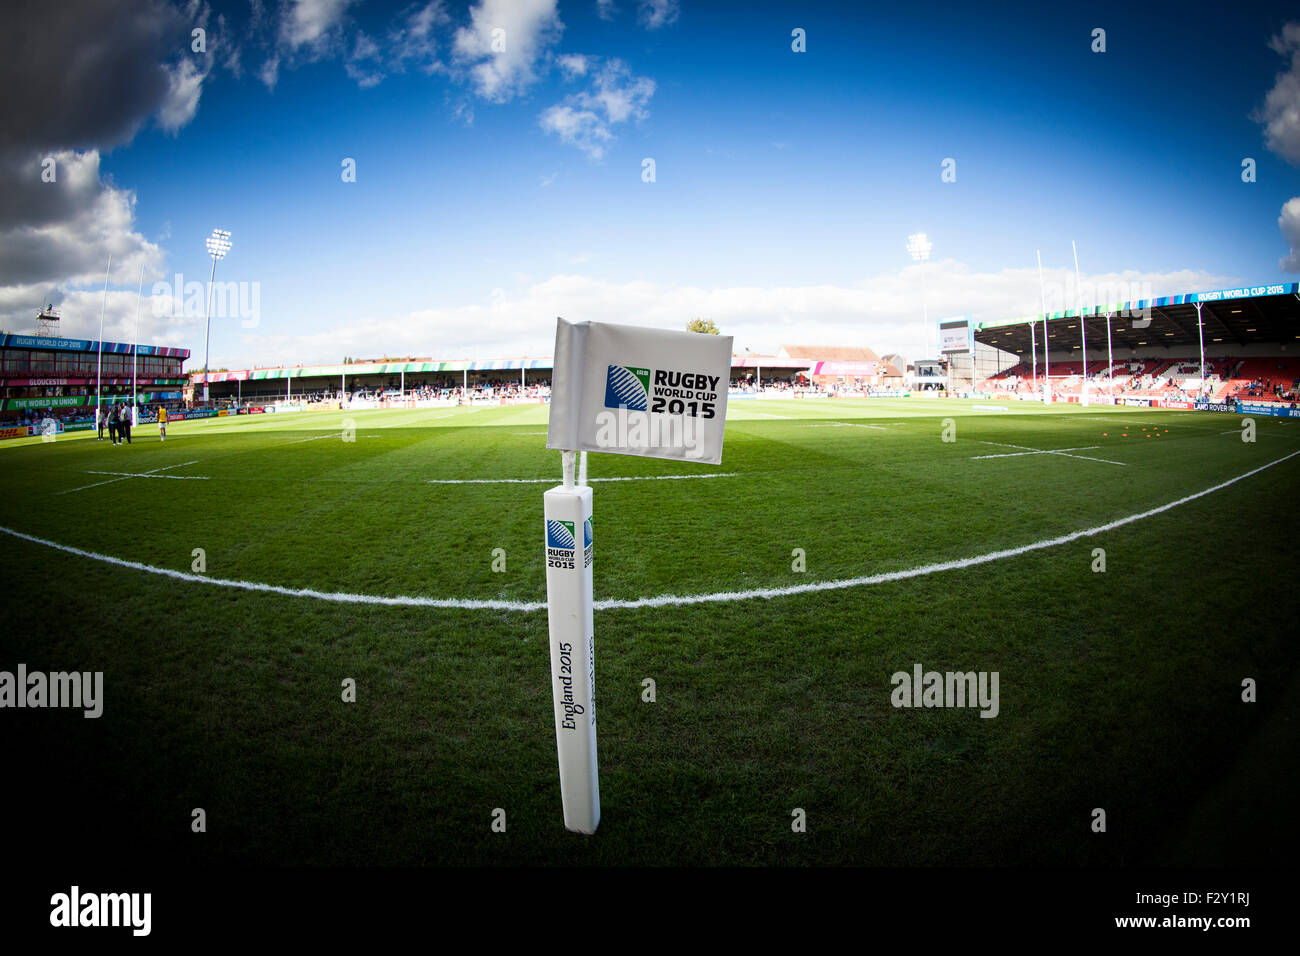 09.2015. Kingsholm Stadium, Gloucester, England. Rugby World Cup. Argentina versus Georgia. A general view of Kingsholm before kick-off. Stock Photo